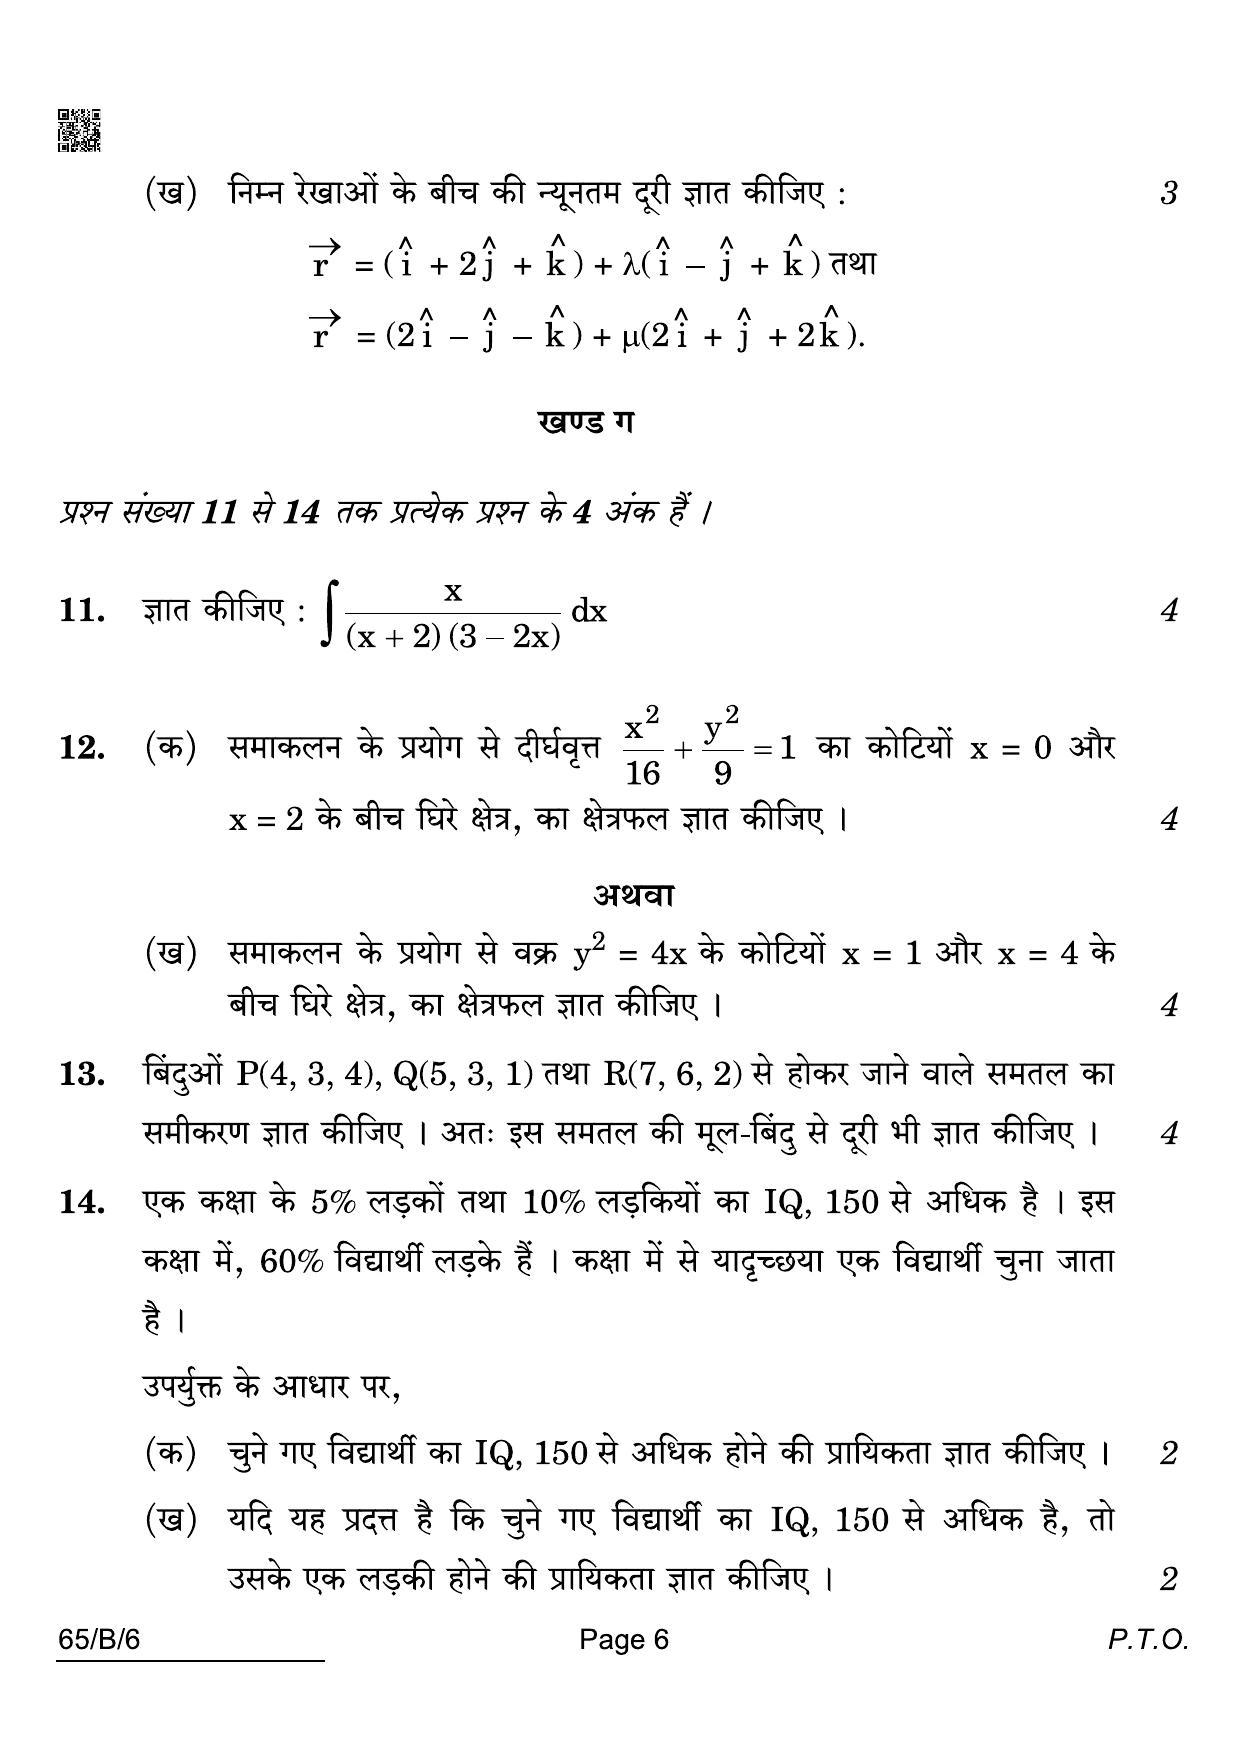 CBSE Class 12 65-B-6 Maths Blind 2022 Compartment Question Paper - Page 6